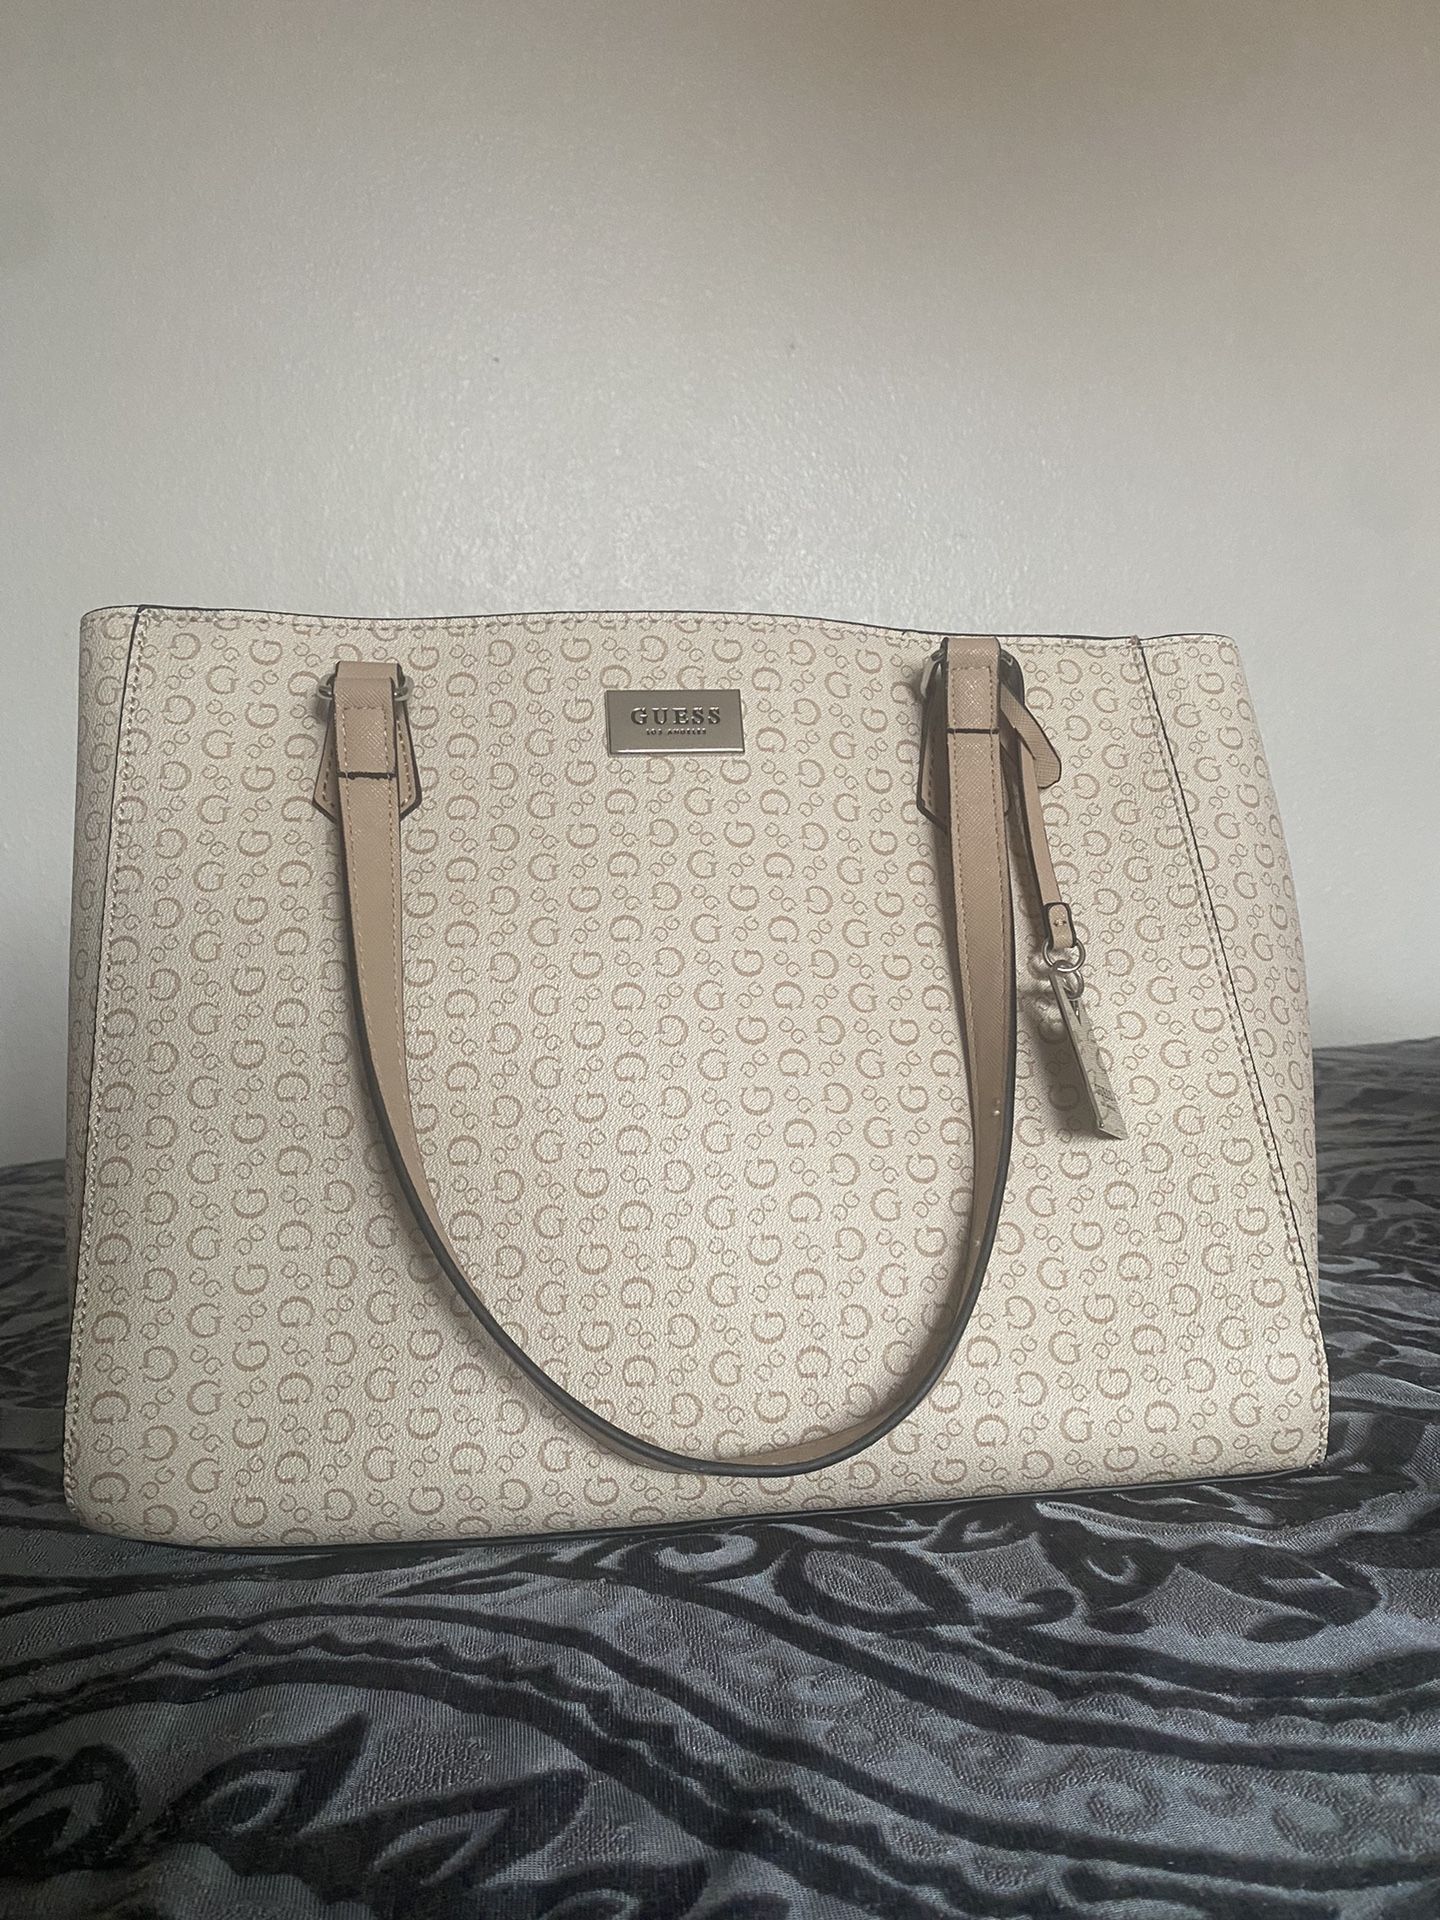 Guess Tote Bag for Sale in Norwalk, CA - OfferUp